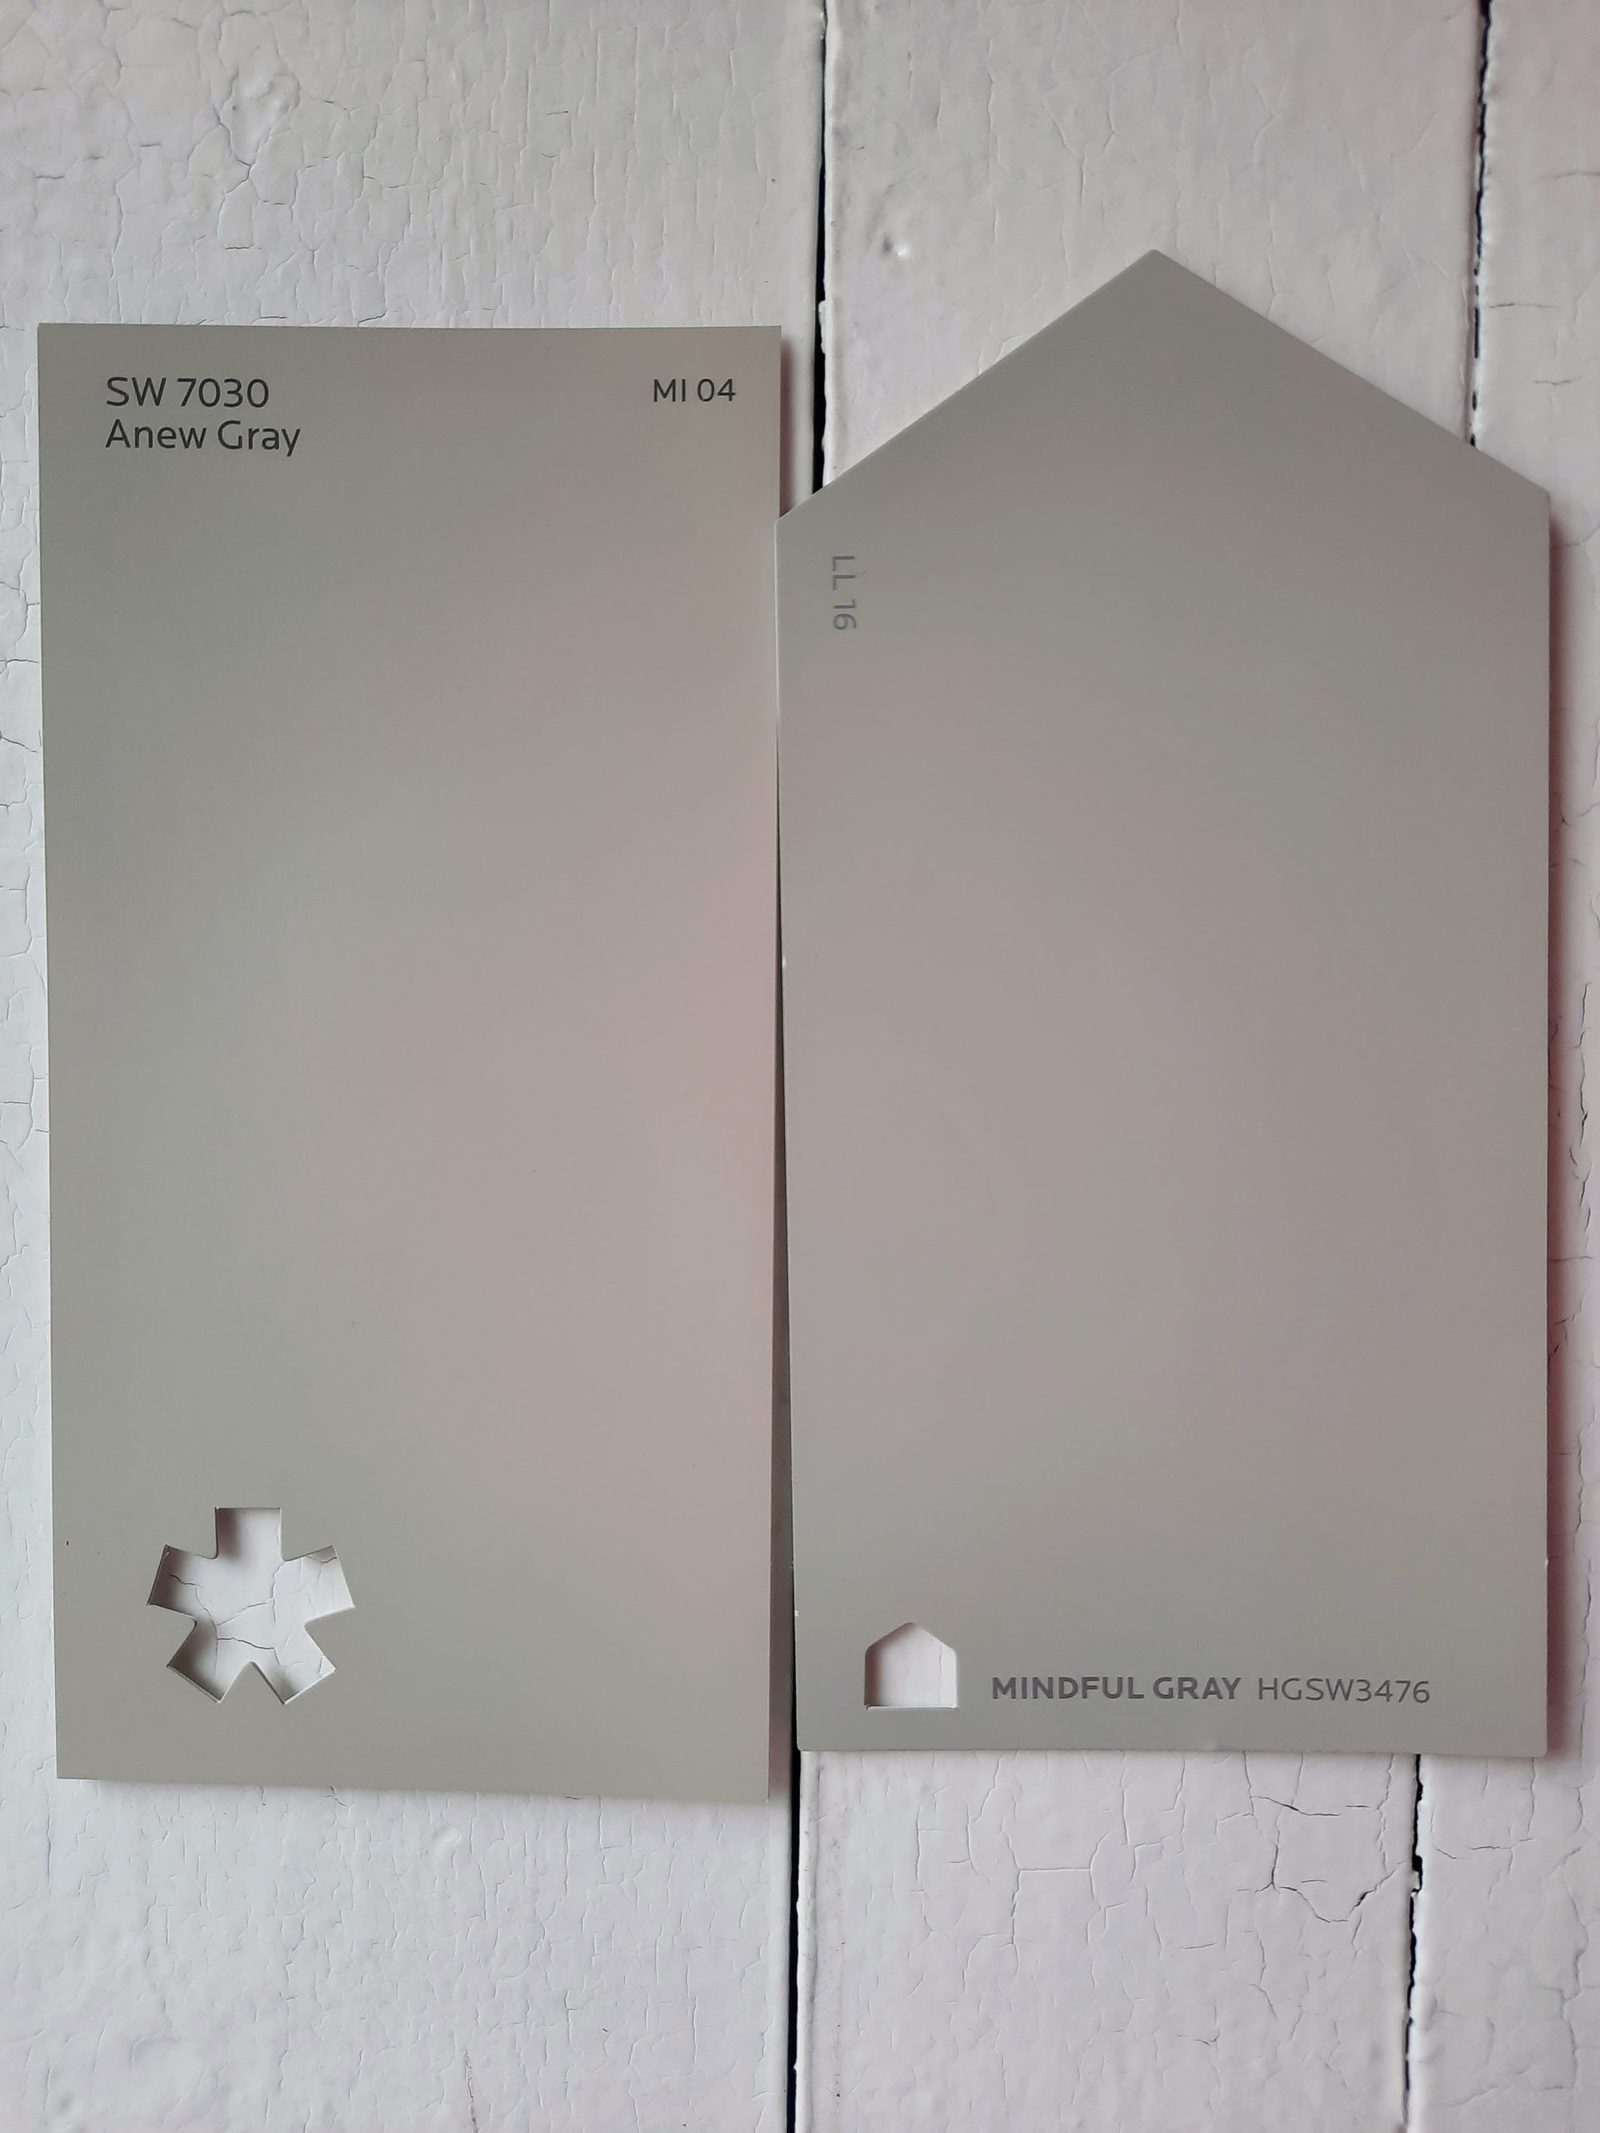 6 Anew Gray vs Mindful Gray scaled